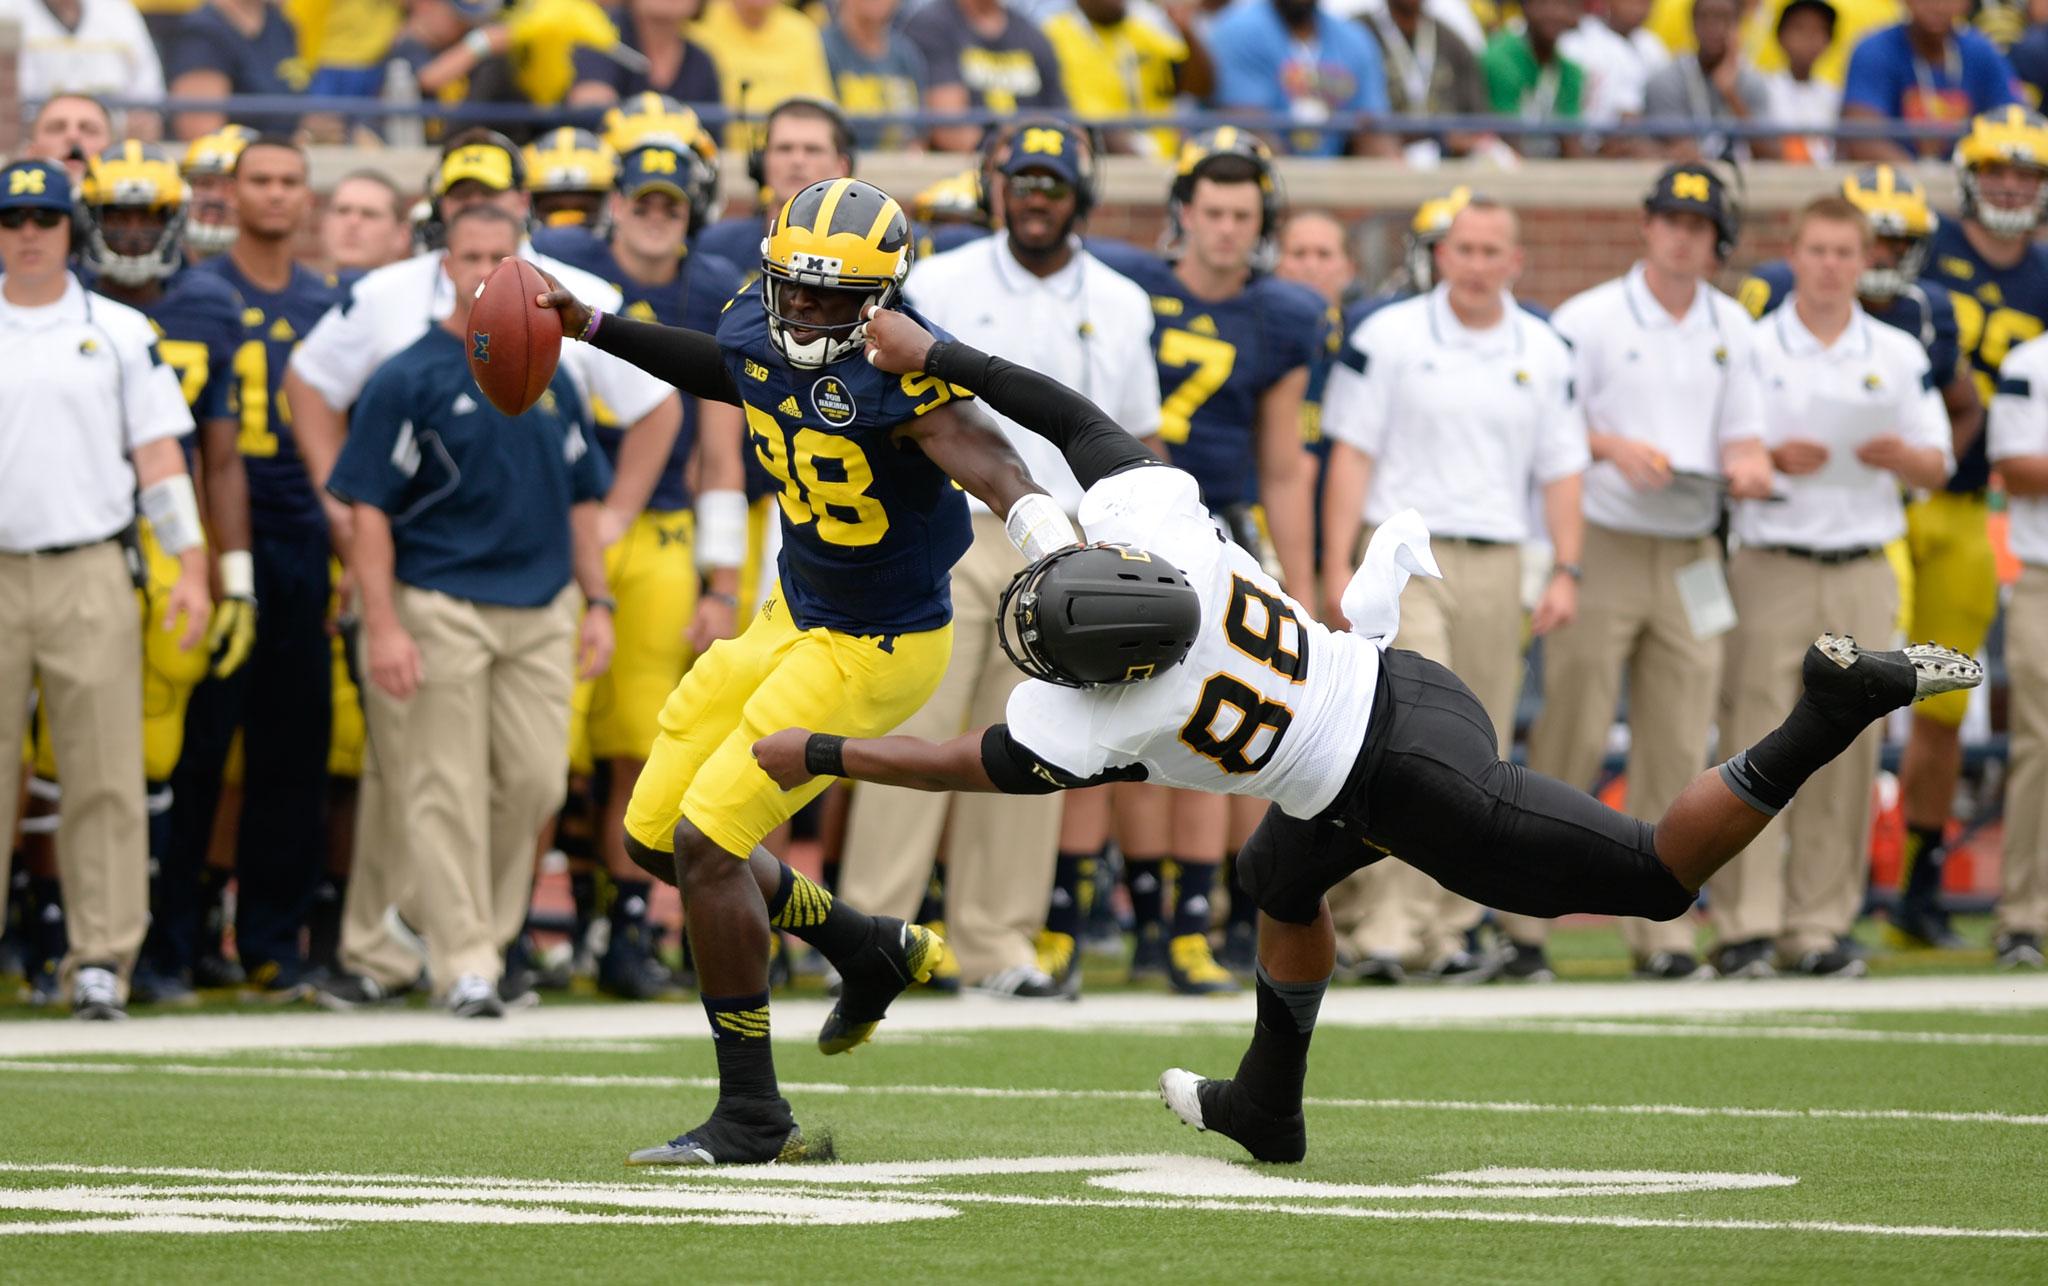 Sophomore wide receiver Jaquil Capel attempts to take down the Michigan offense during the first half of Saturdays season opening game against Michigan. The Wolverines defeated the Mountaineers 52-14. Photo by Justin Perry  | The Appalachian